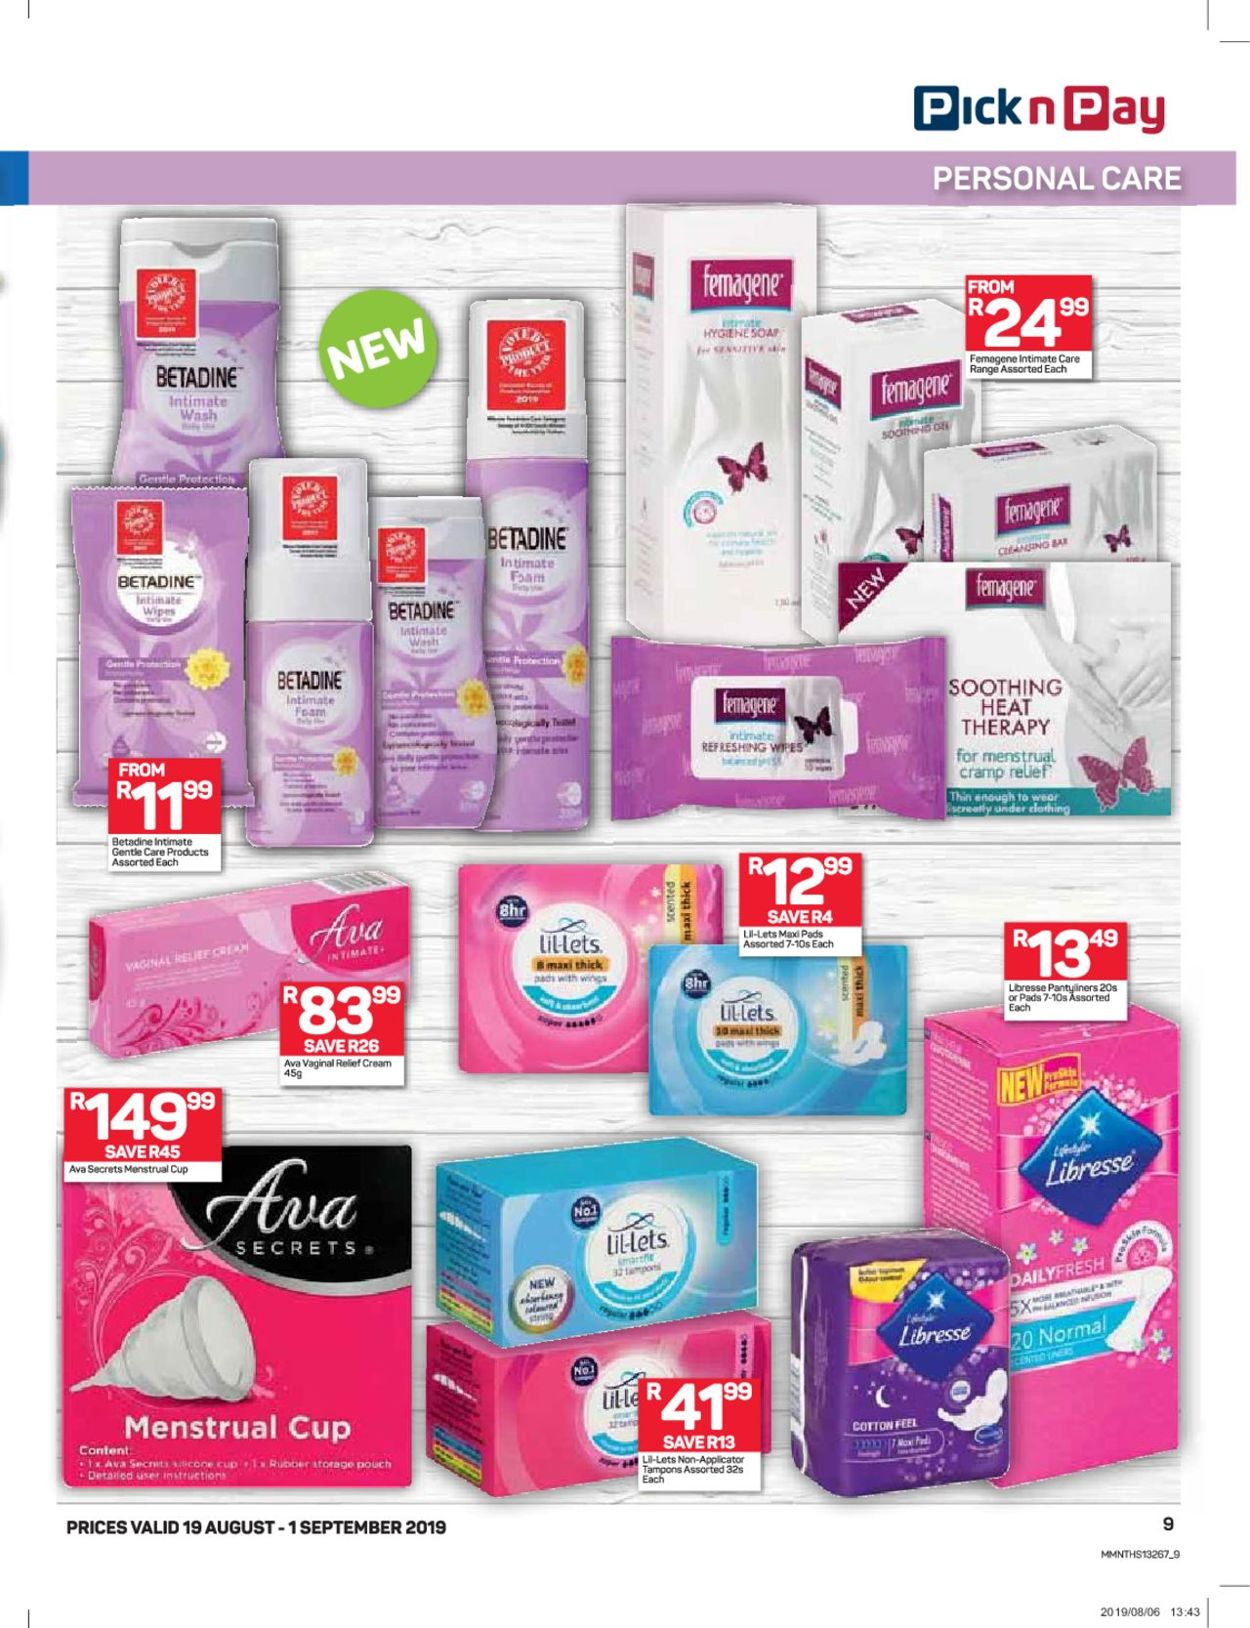 Pick n Pay Catalogue - 2019/08/19-2019/09/01 (Page 3)